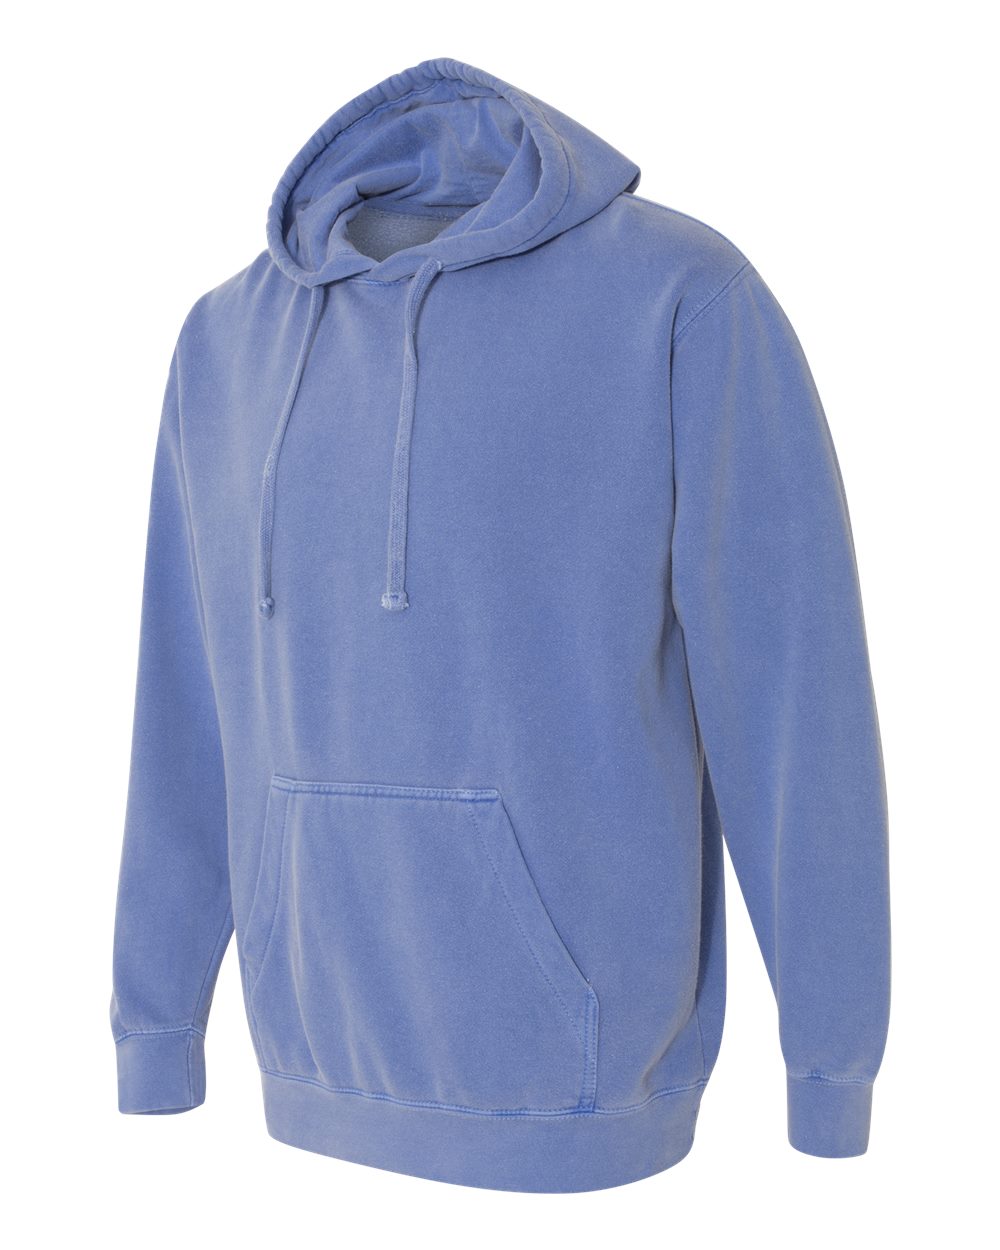 Comfort Colors 1567 - Garment Dyed Hooded Pullover Sweatshirt $32.42 ...